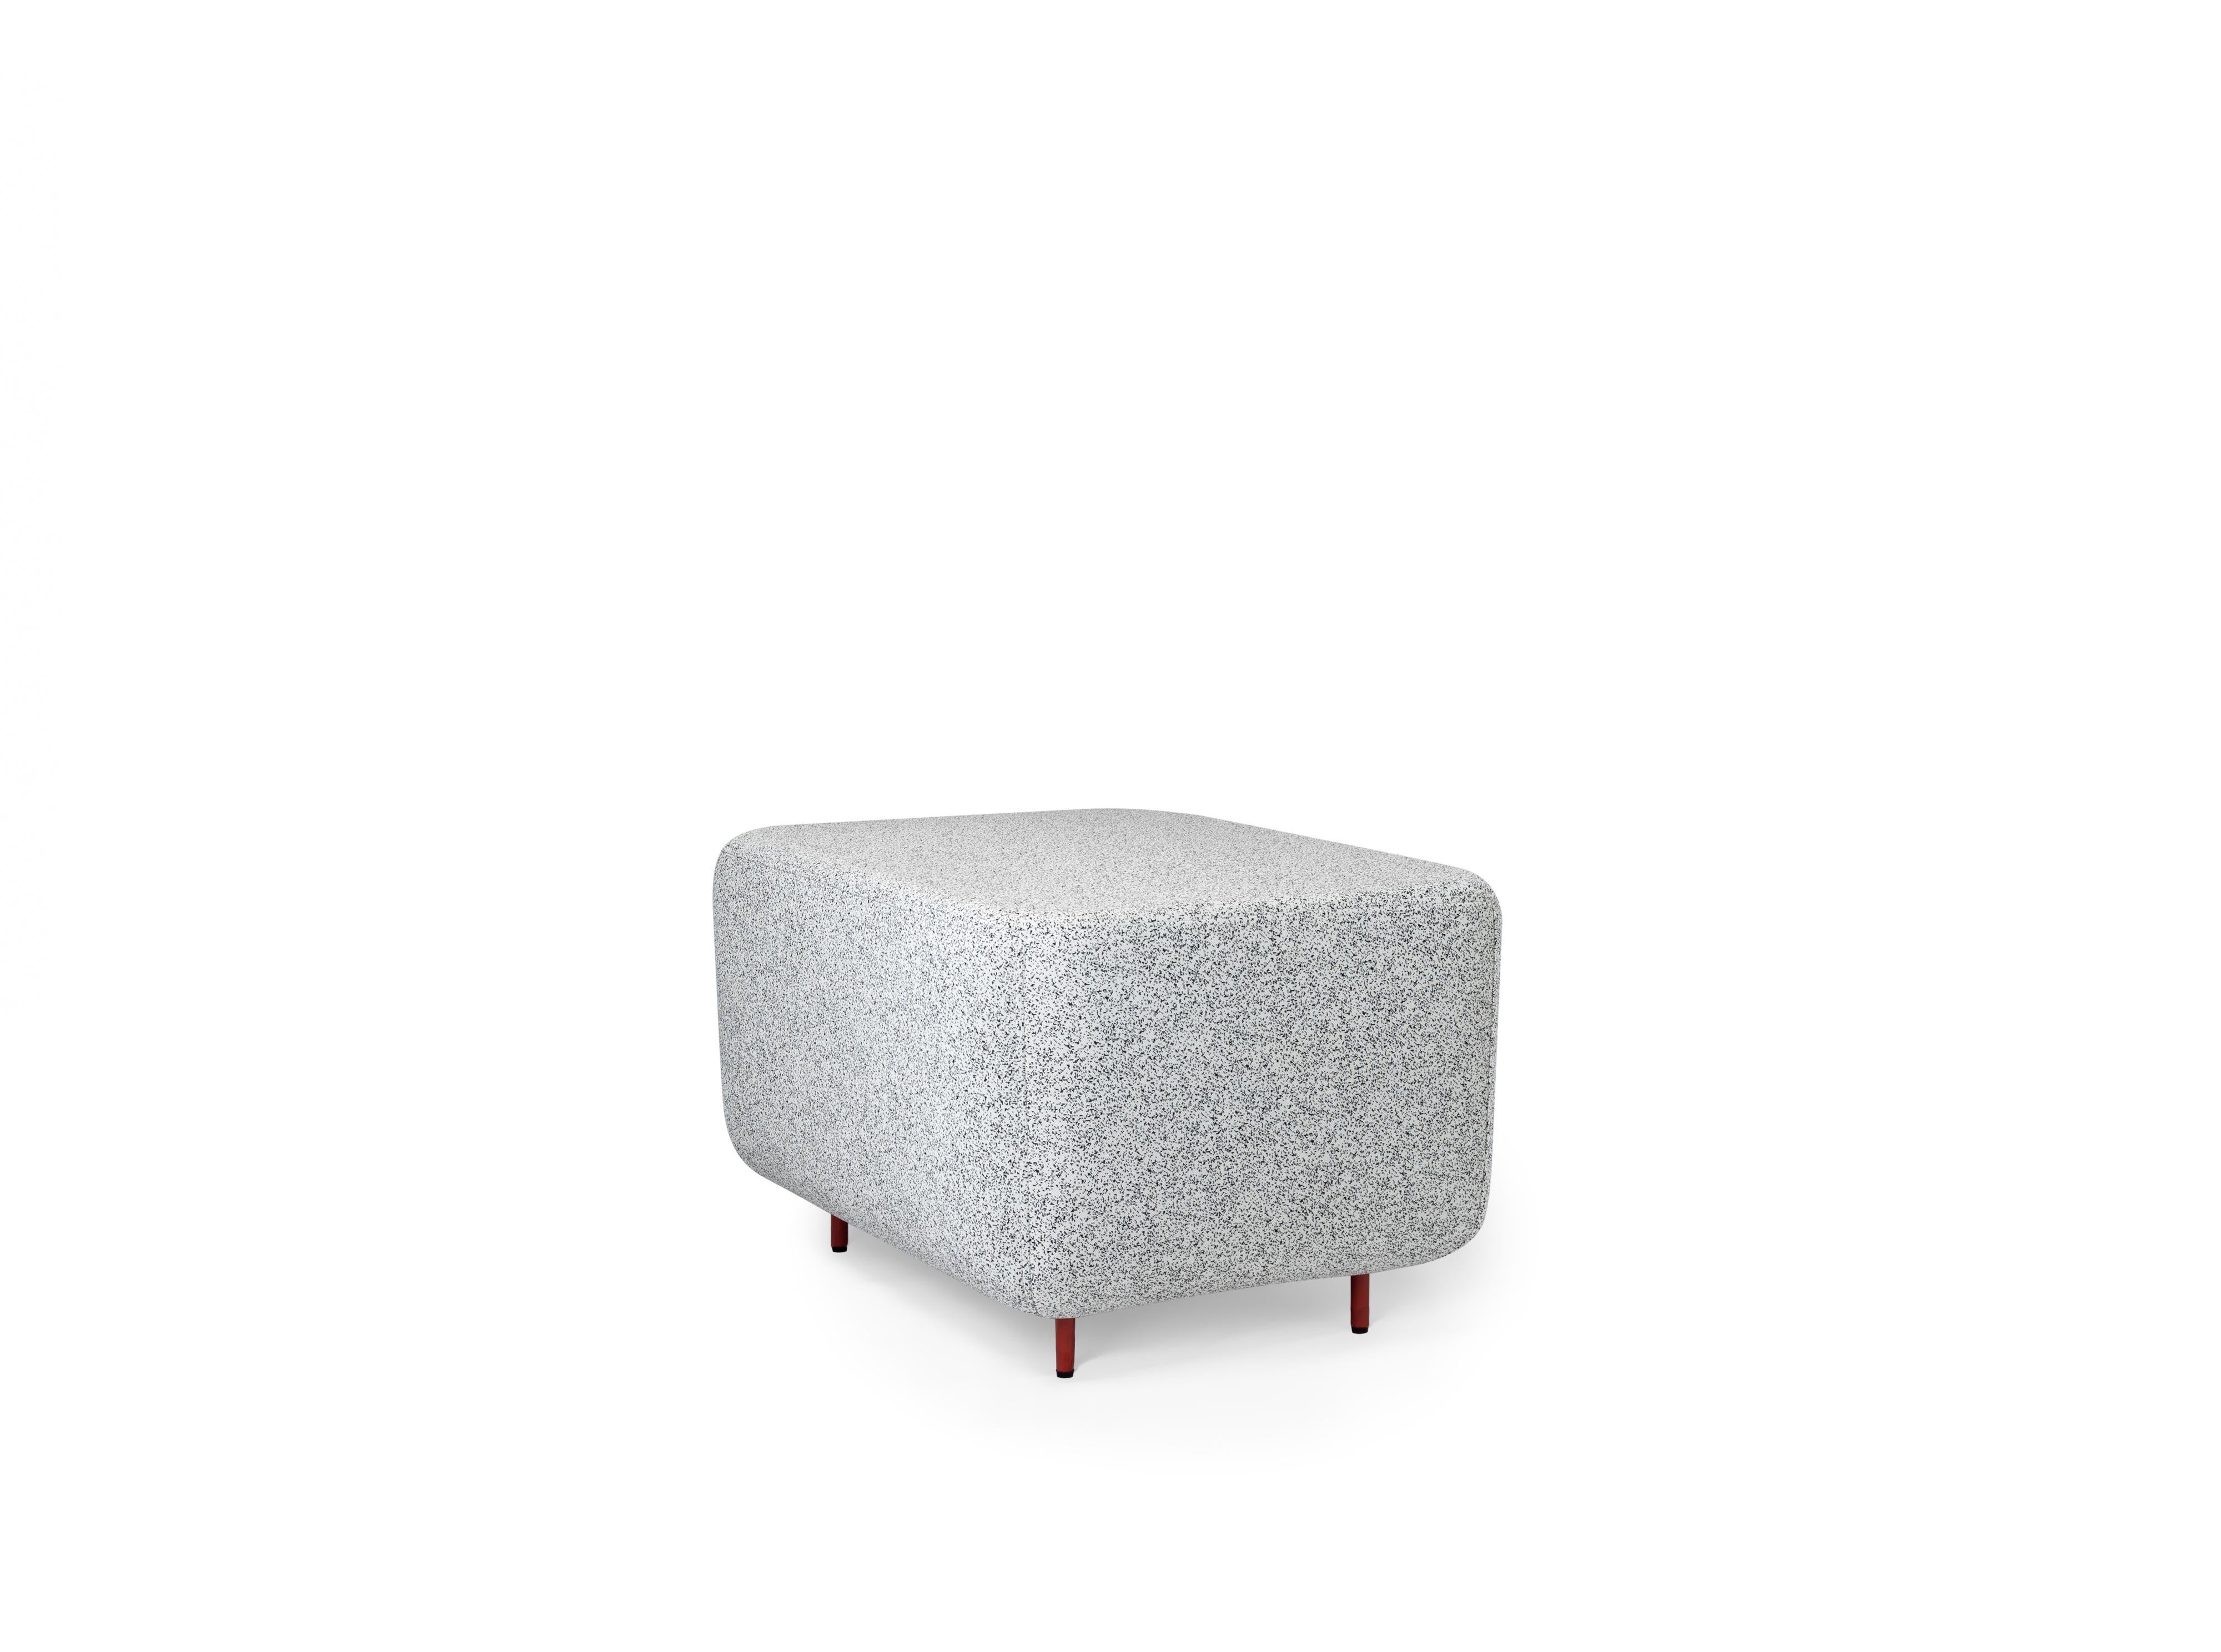 Petite Friture Small Hoff Stool in Grey by Morten & Jonas, 2015

Hoff created by designer duo Morten & Jonas is a collection of two modular stools and two modular armchairs. they can combine to make a sofa as well an entire living room area. They